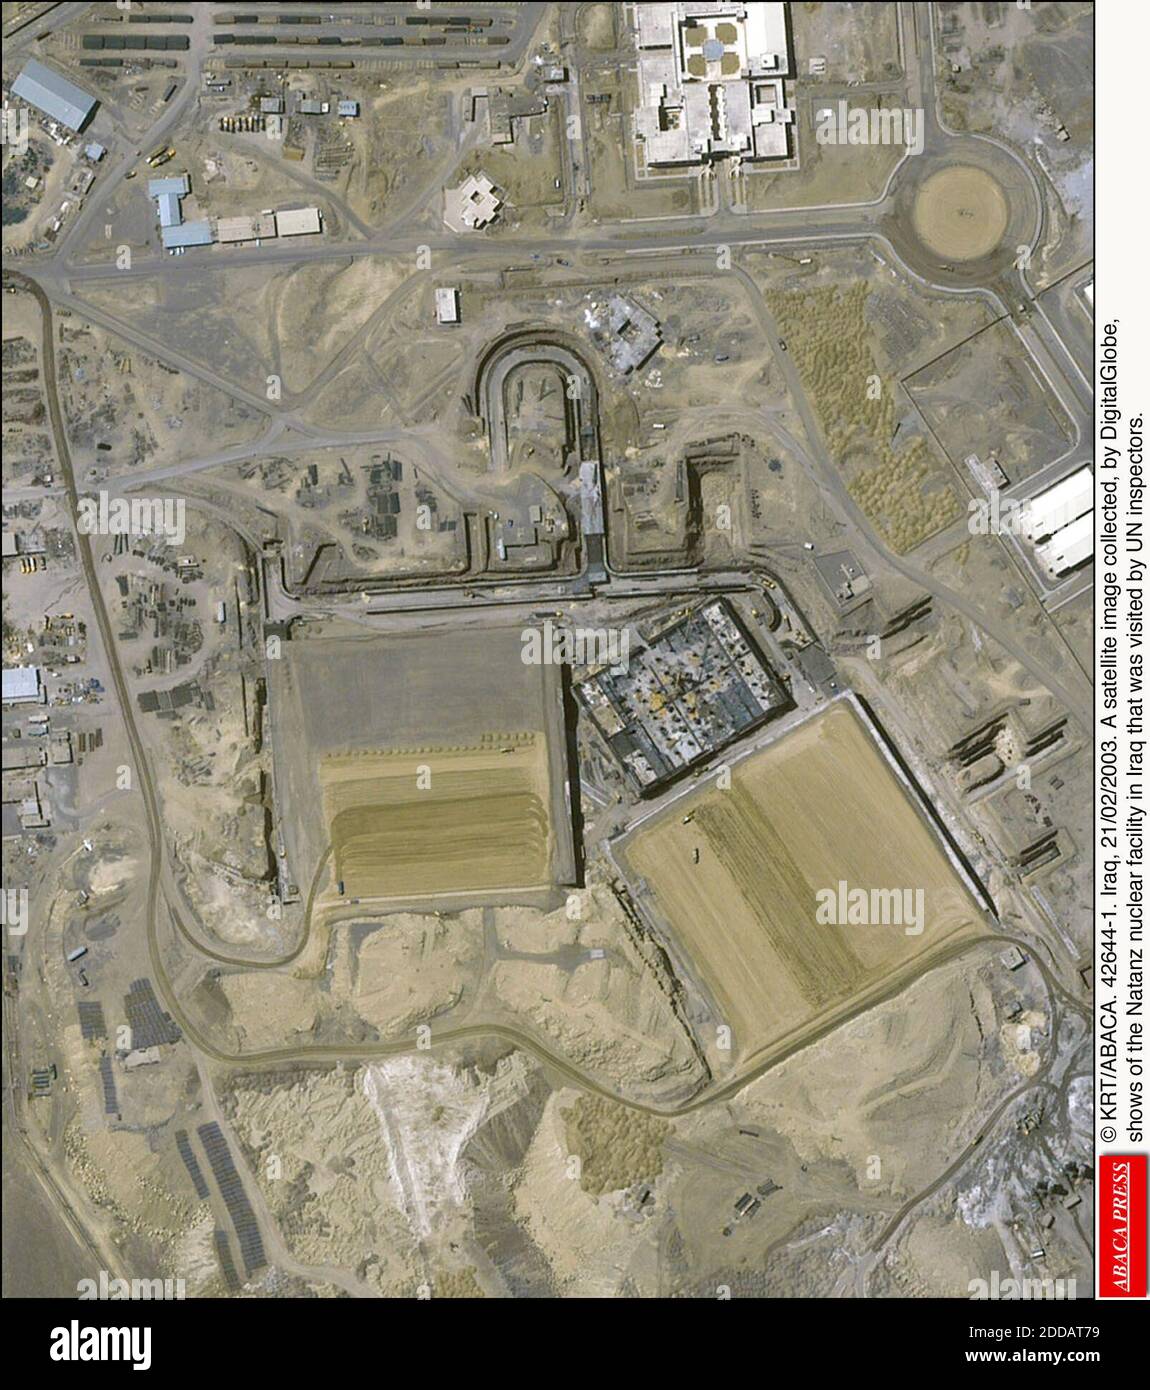 NO FILM, NO VIDEO, NO TV, NO DOCUMENTARY - © KRT/ABACA. 42644-1. Iraq, 21/02/2003. A satellite image collected, by DigitalGlobe, shows of the Natanz nuclear facility in Iraq that was visited by UN inspectors. Stock Photo